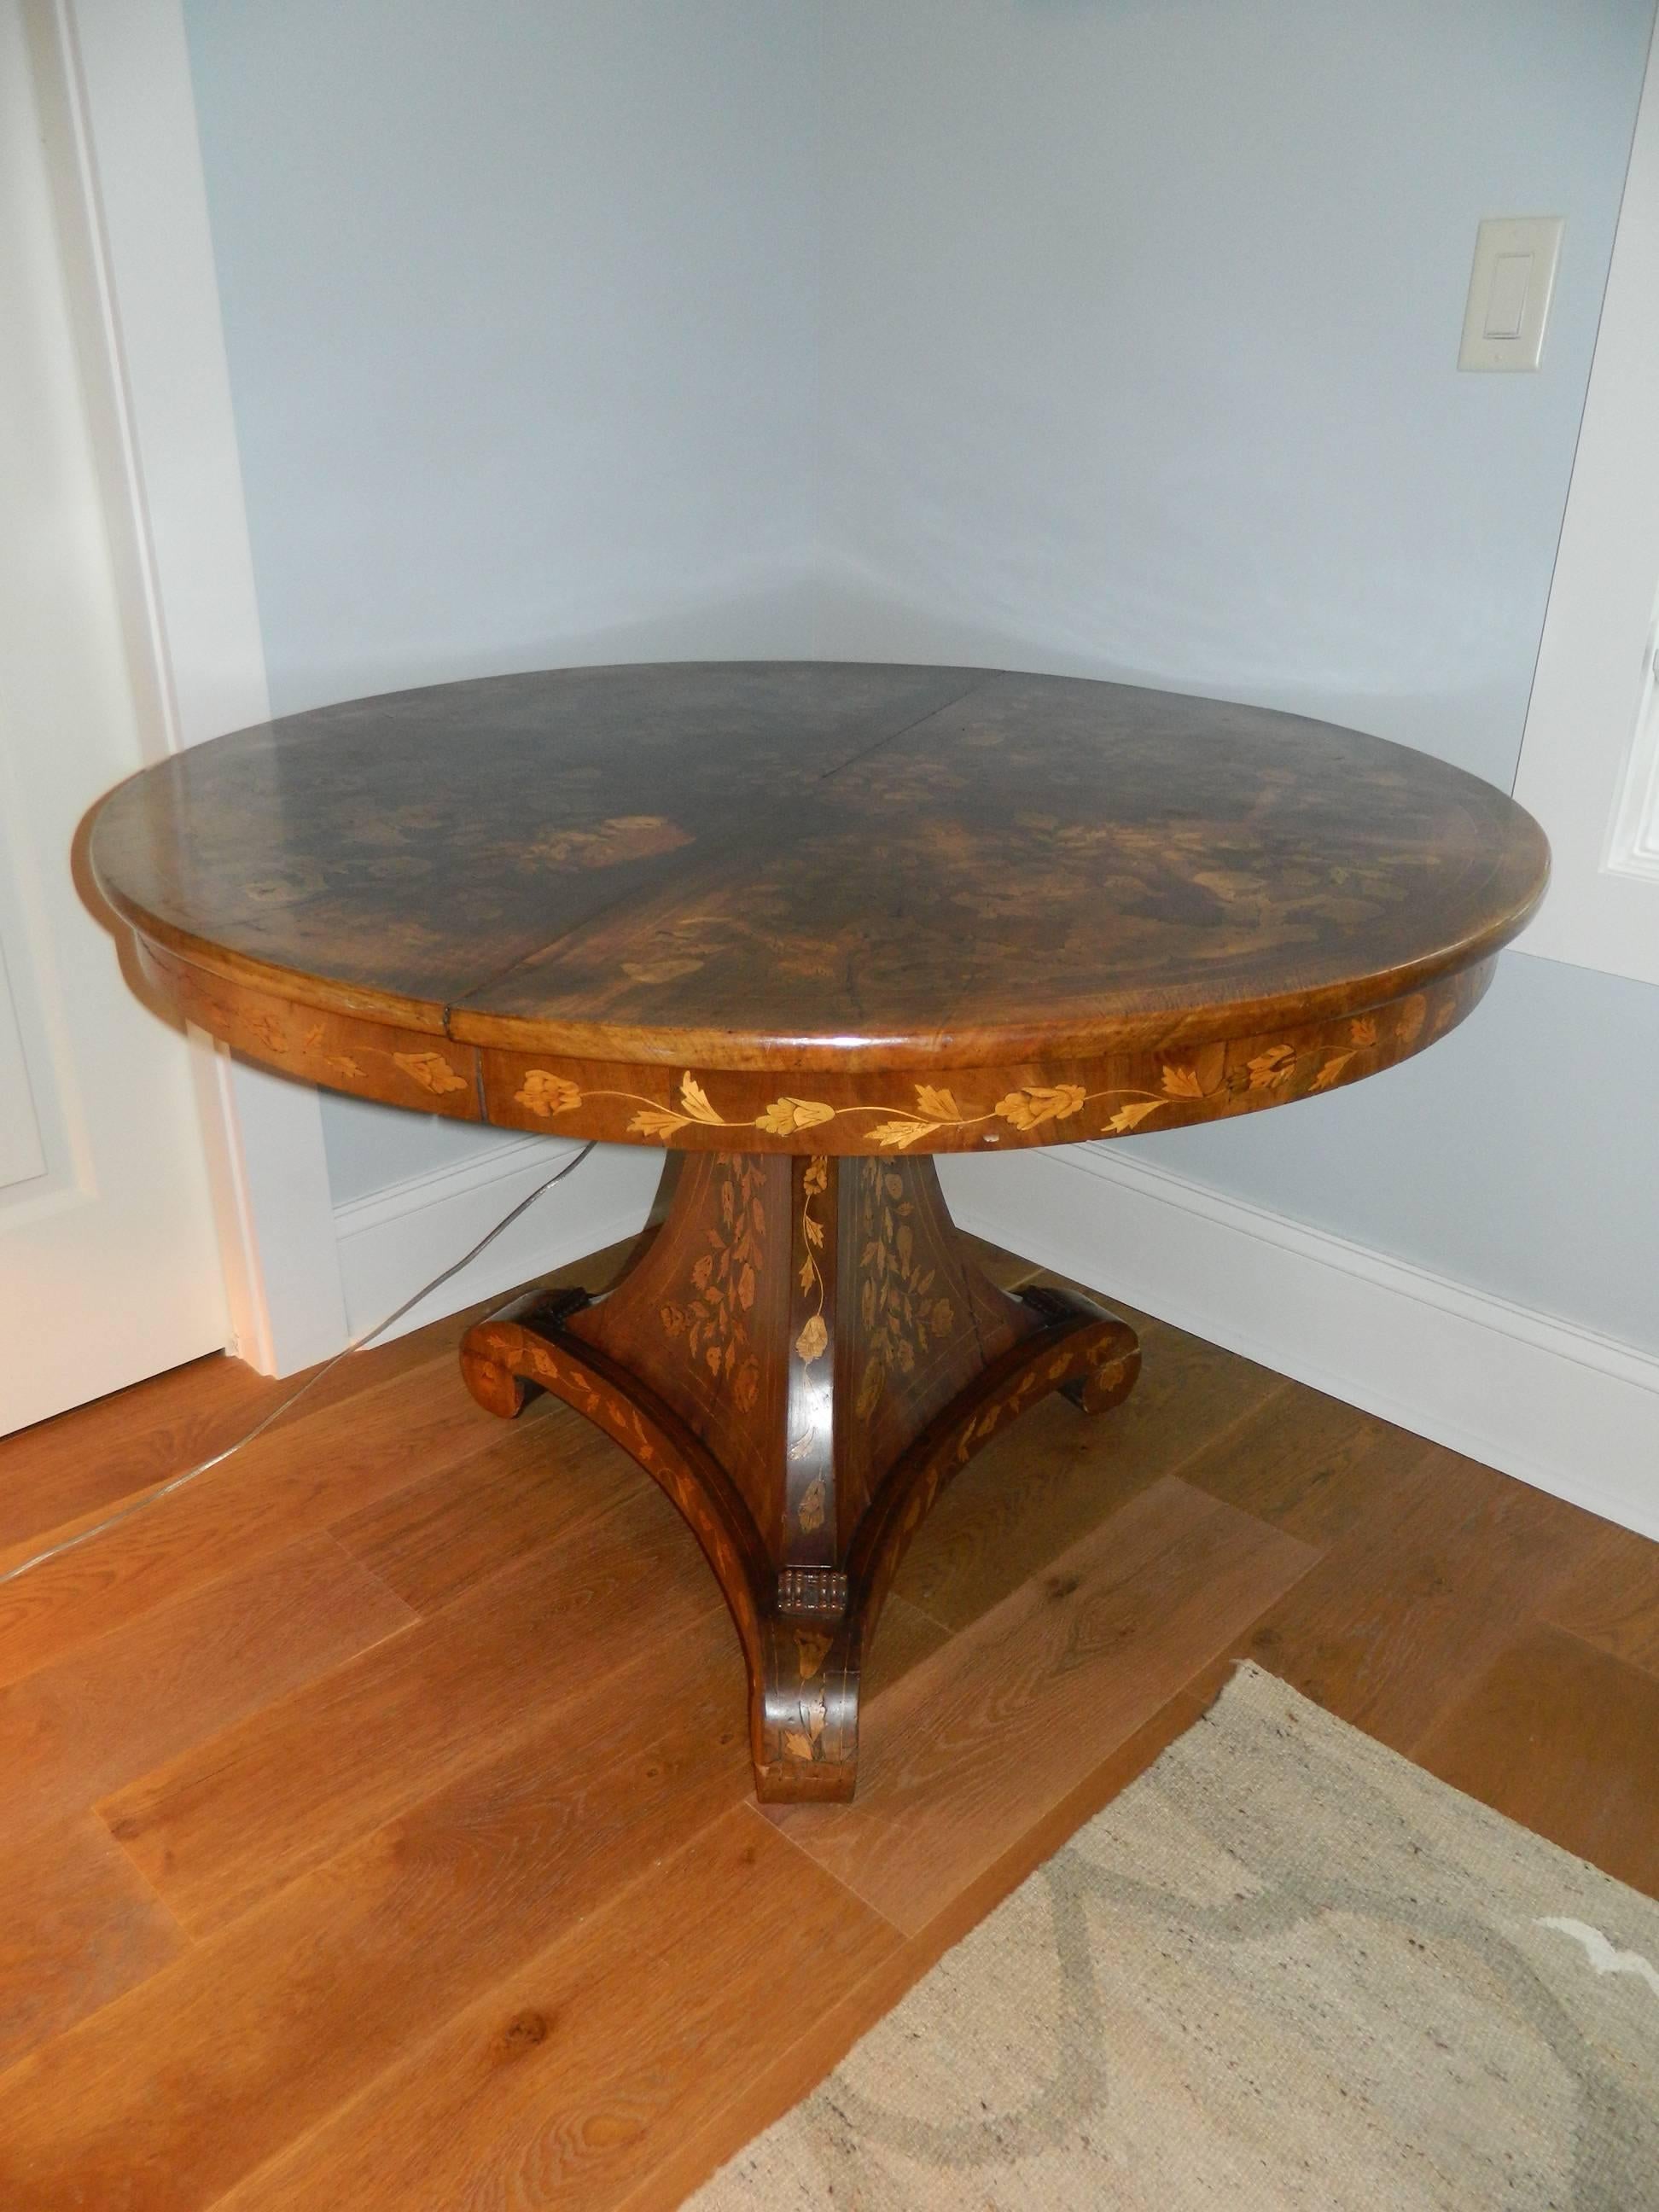 Dutch round marquetry center or dining table on a pedestal, mid-19th century.   
  